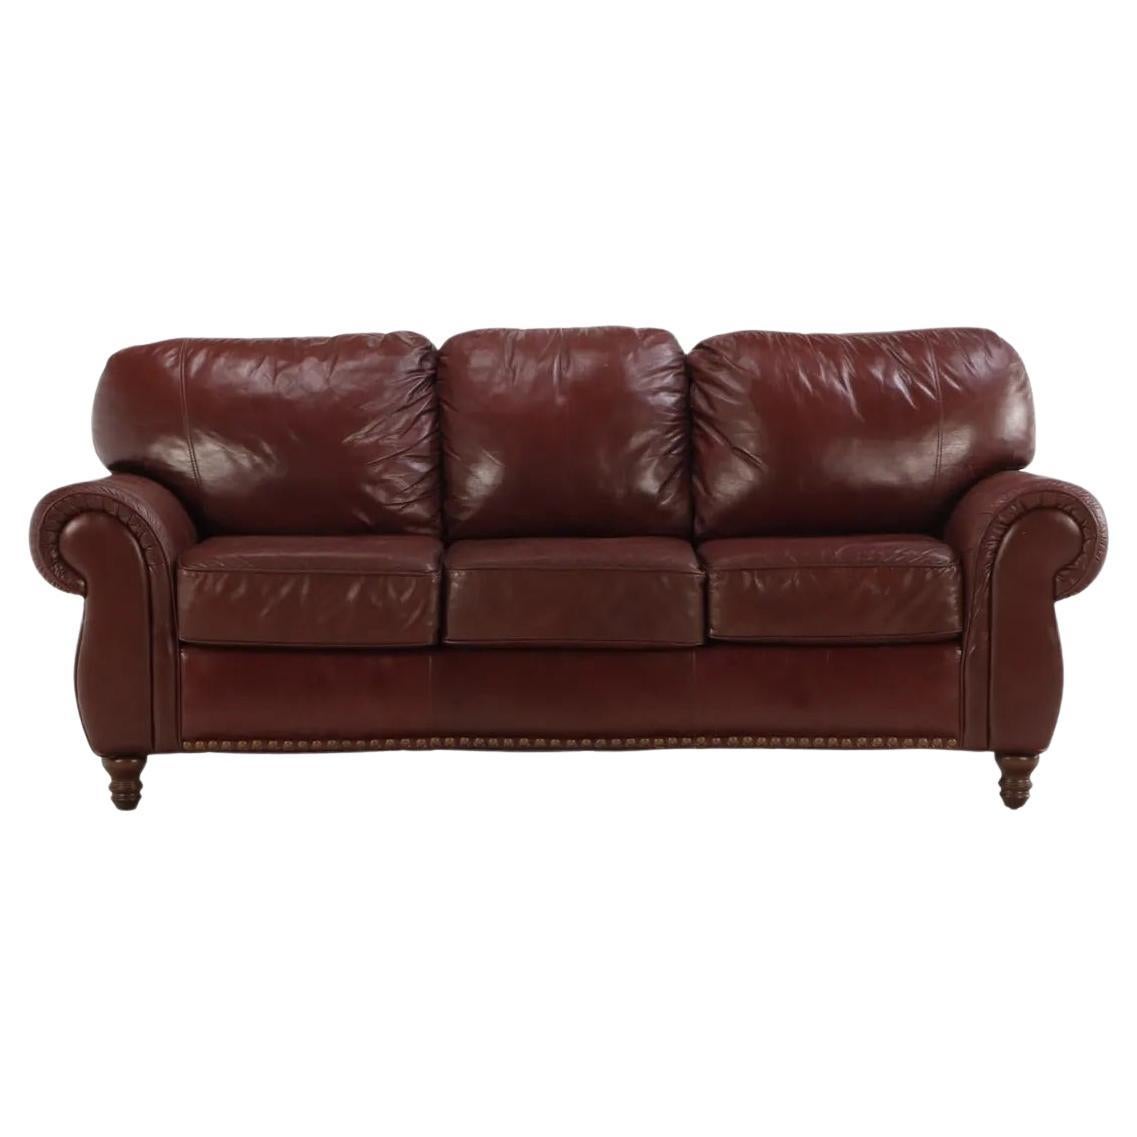 Late 20th Century Modern Cognac Leather Sofa With Scroll Arm and Nailhead Trim